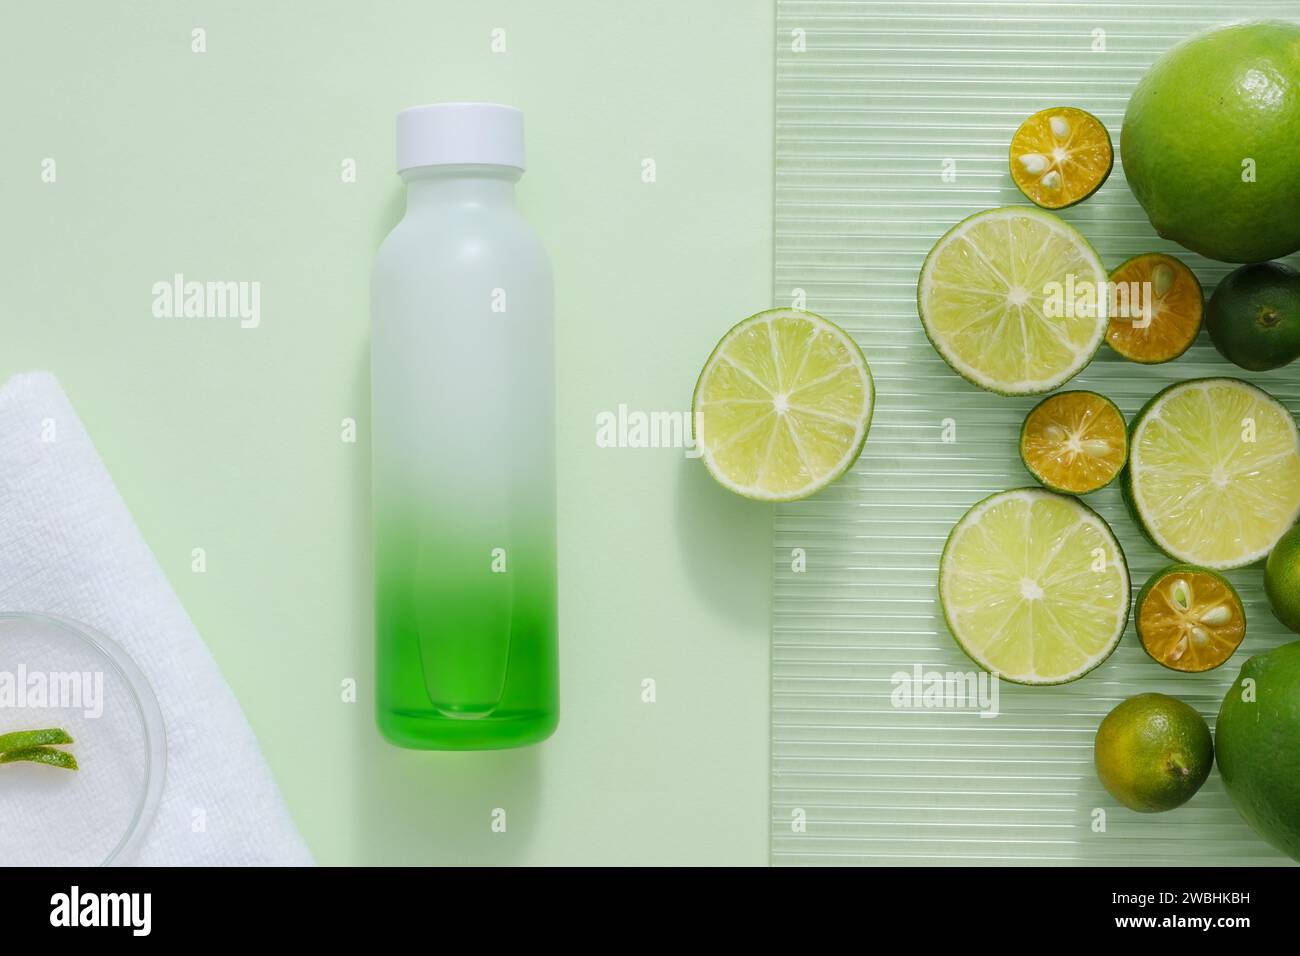 Unlabeled bottle in gradient green color displayed with many kumquat and lime round slices. White towel with a petri dish placed on. Template for bran Stock Photo